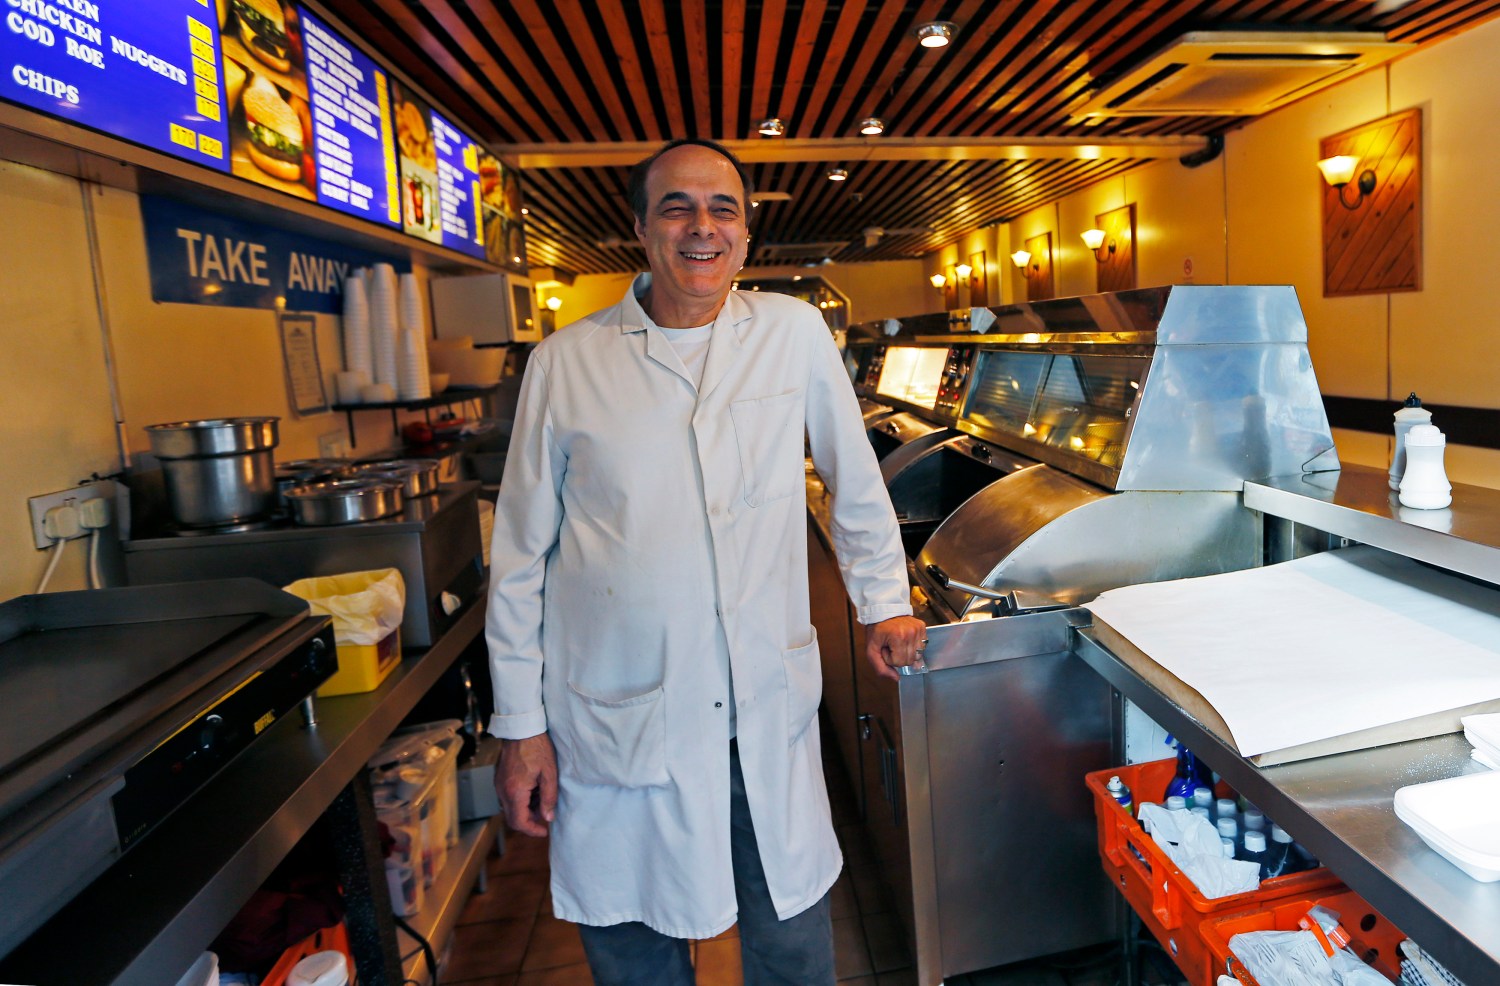 Paul Georgiou, owner of The Dining Plaice fish and chip shop, poses for a photograph in central London May 22, 2012. Deep-fried fish in a crispy batter with fat golden chips is still as popular as ever with the British public, ranked alongside roast beef, Yorkshire pudding and chicken tikka masala as the nation's favourite dish. Picture taken May 22, 2012. REUTERS/Eddie Keogh (BRITAIN - Tags: FOOD SOCIETY) ATTENTION EDITORS: PICTURE 12 OF 29 FOR PACKAGE 'AS BRITISH AS FISH AND CHIPS'.SEARCH 'EDDIE FISH' TO FIND ALL IMAGES - GM1E8671J3U01